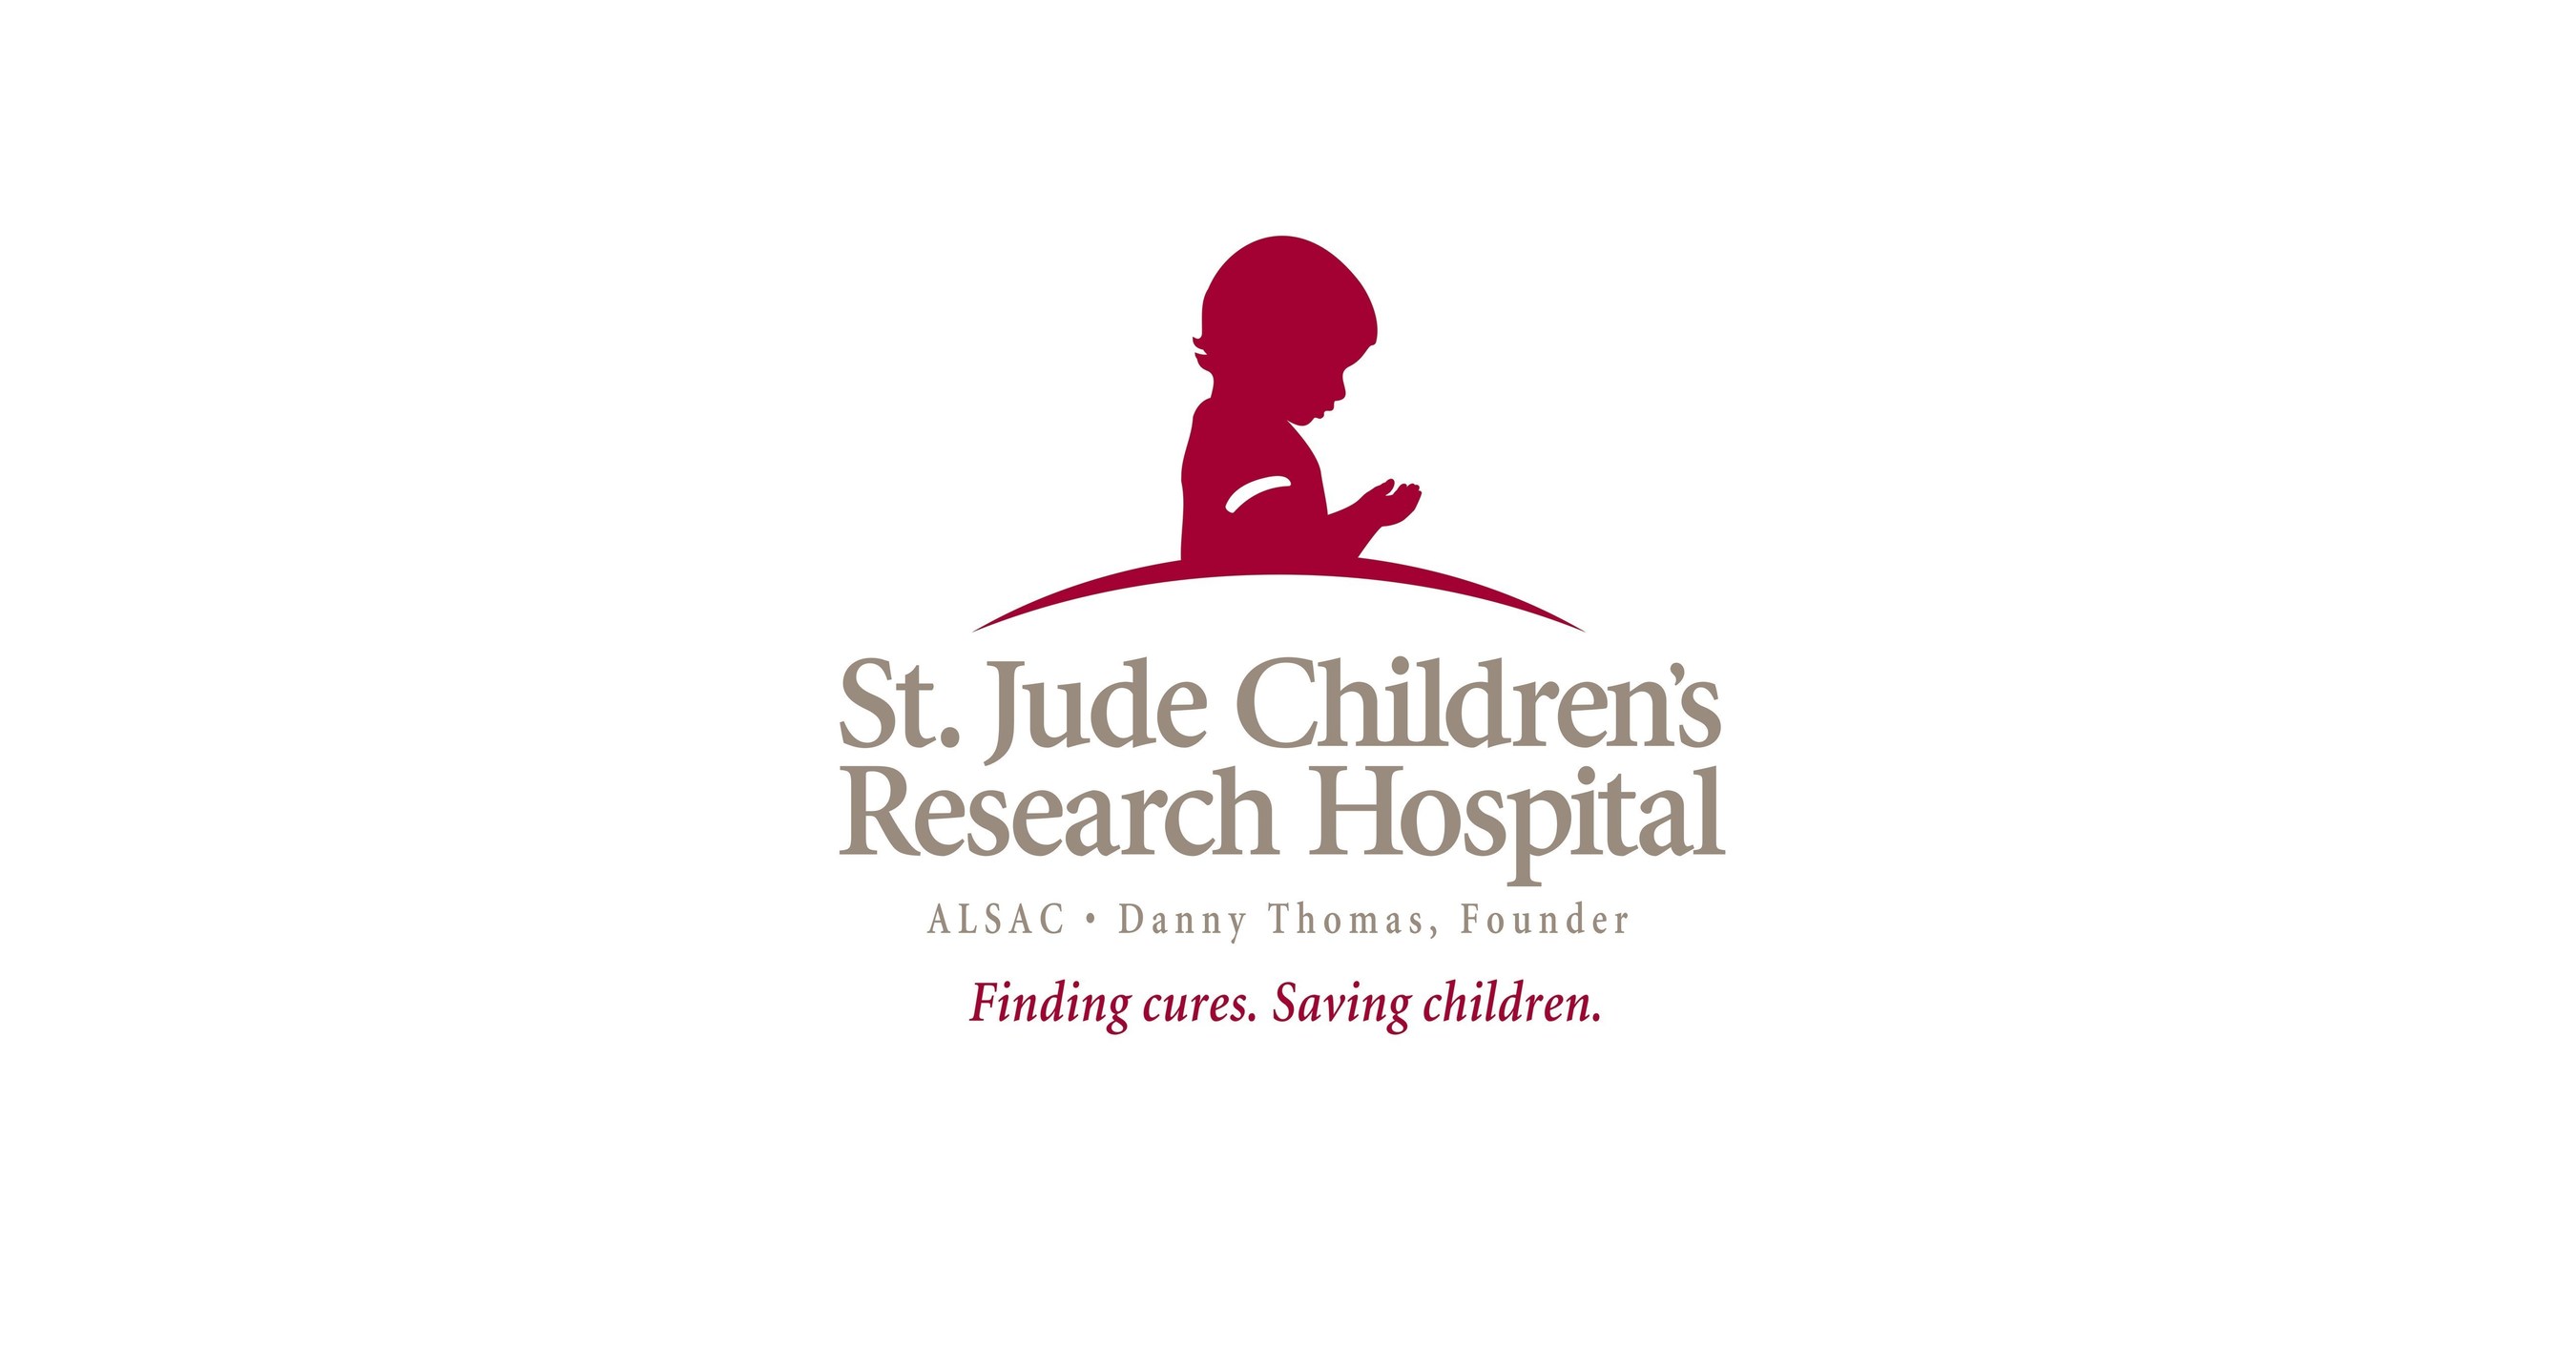 media-statement-from-st-jude-children-s-research-hospital-issued